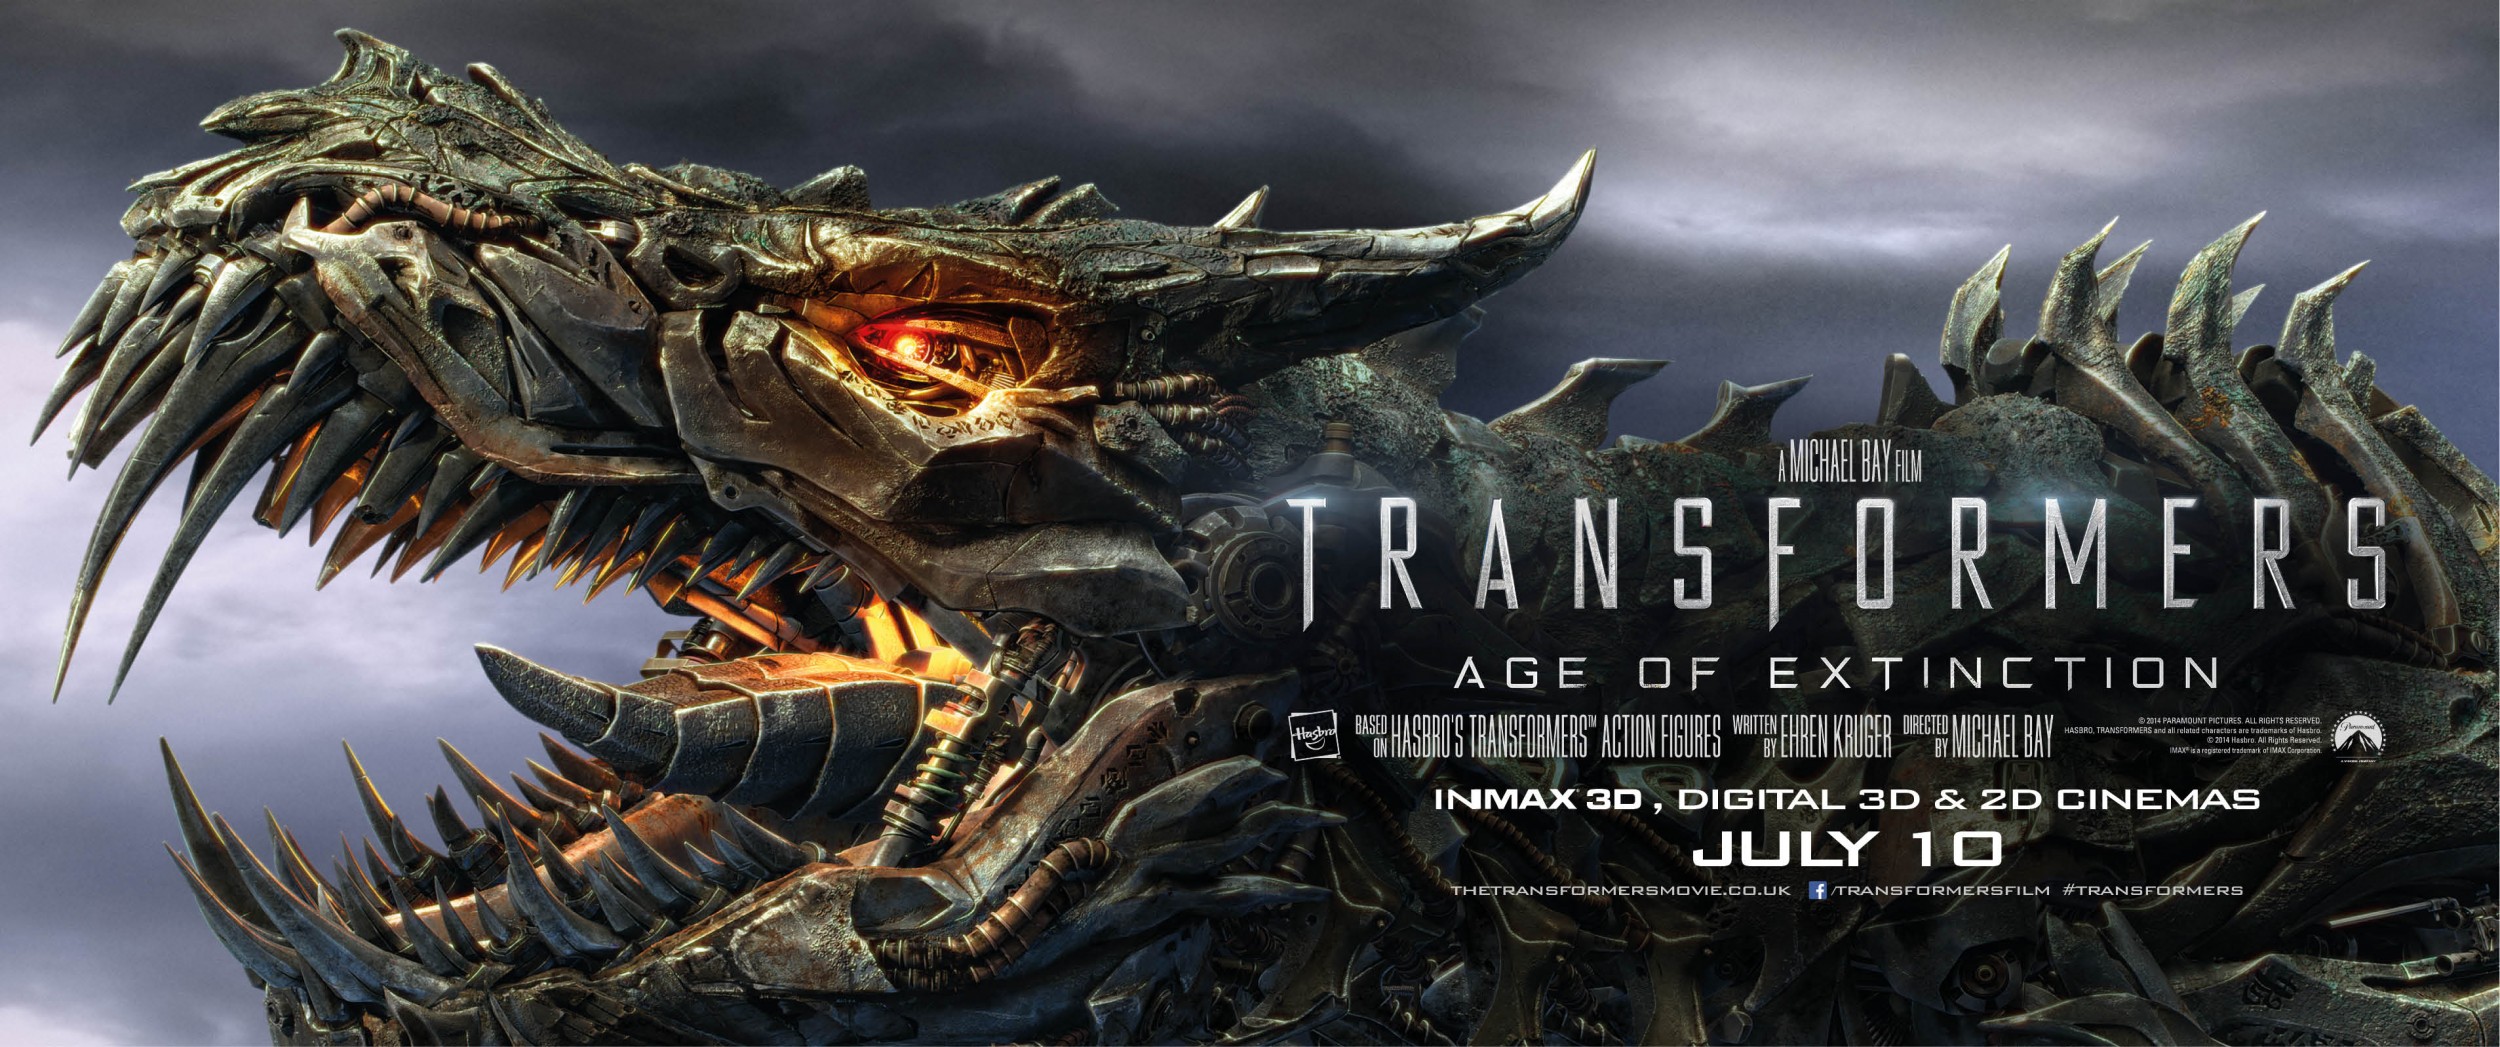 Mega Sized Movie Poster Image for Transformers: Age of Extinction (#11 of 22)